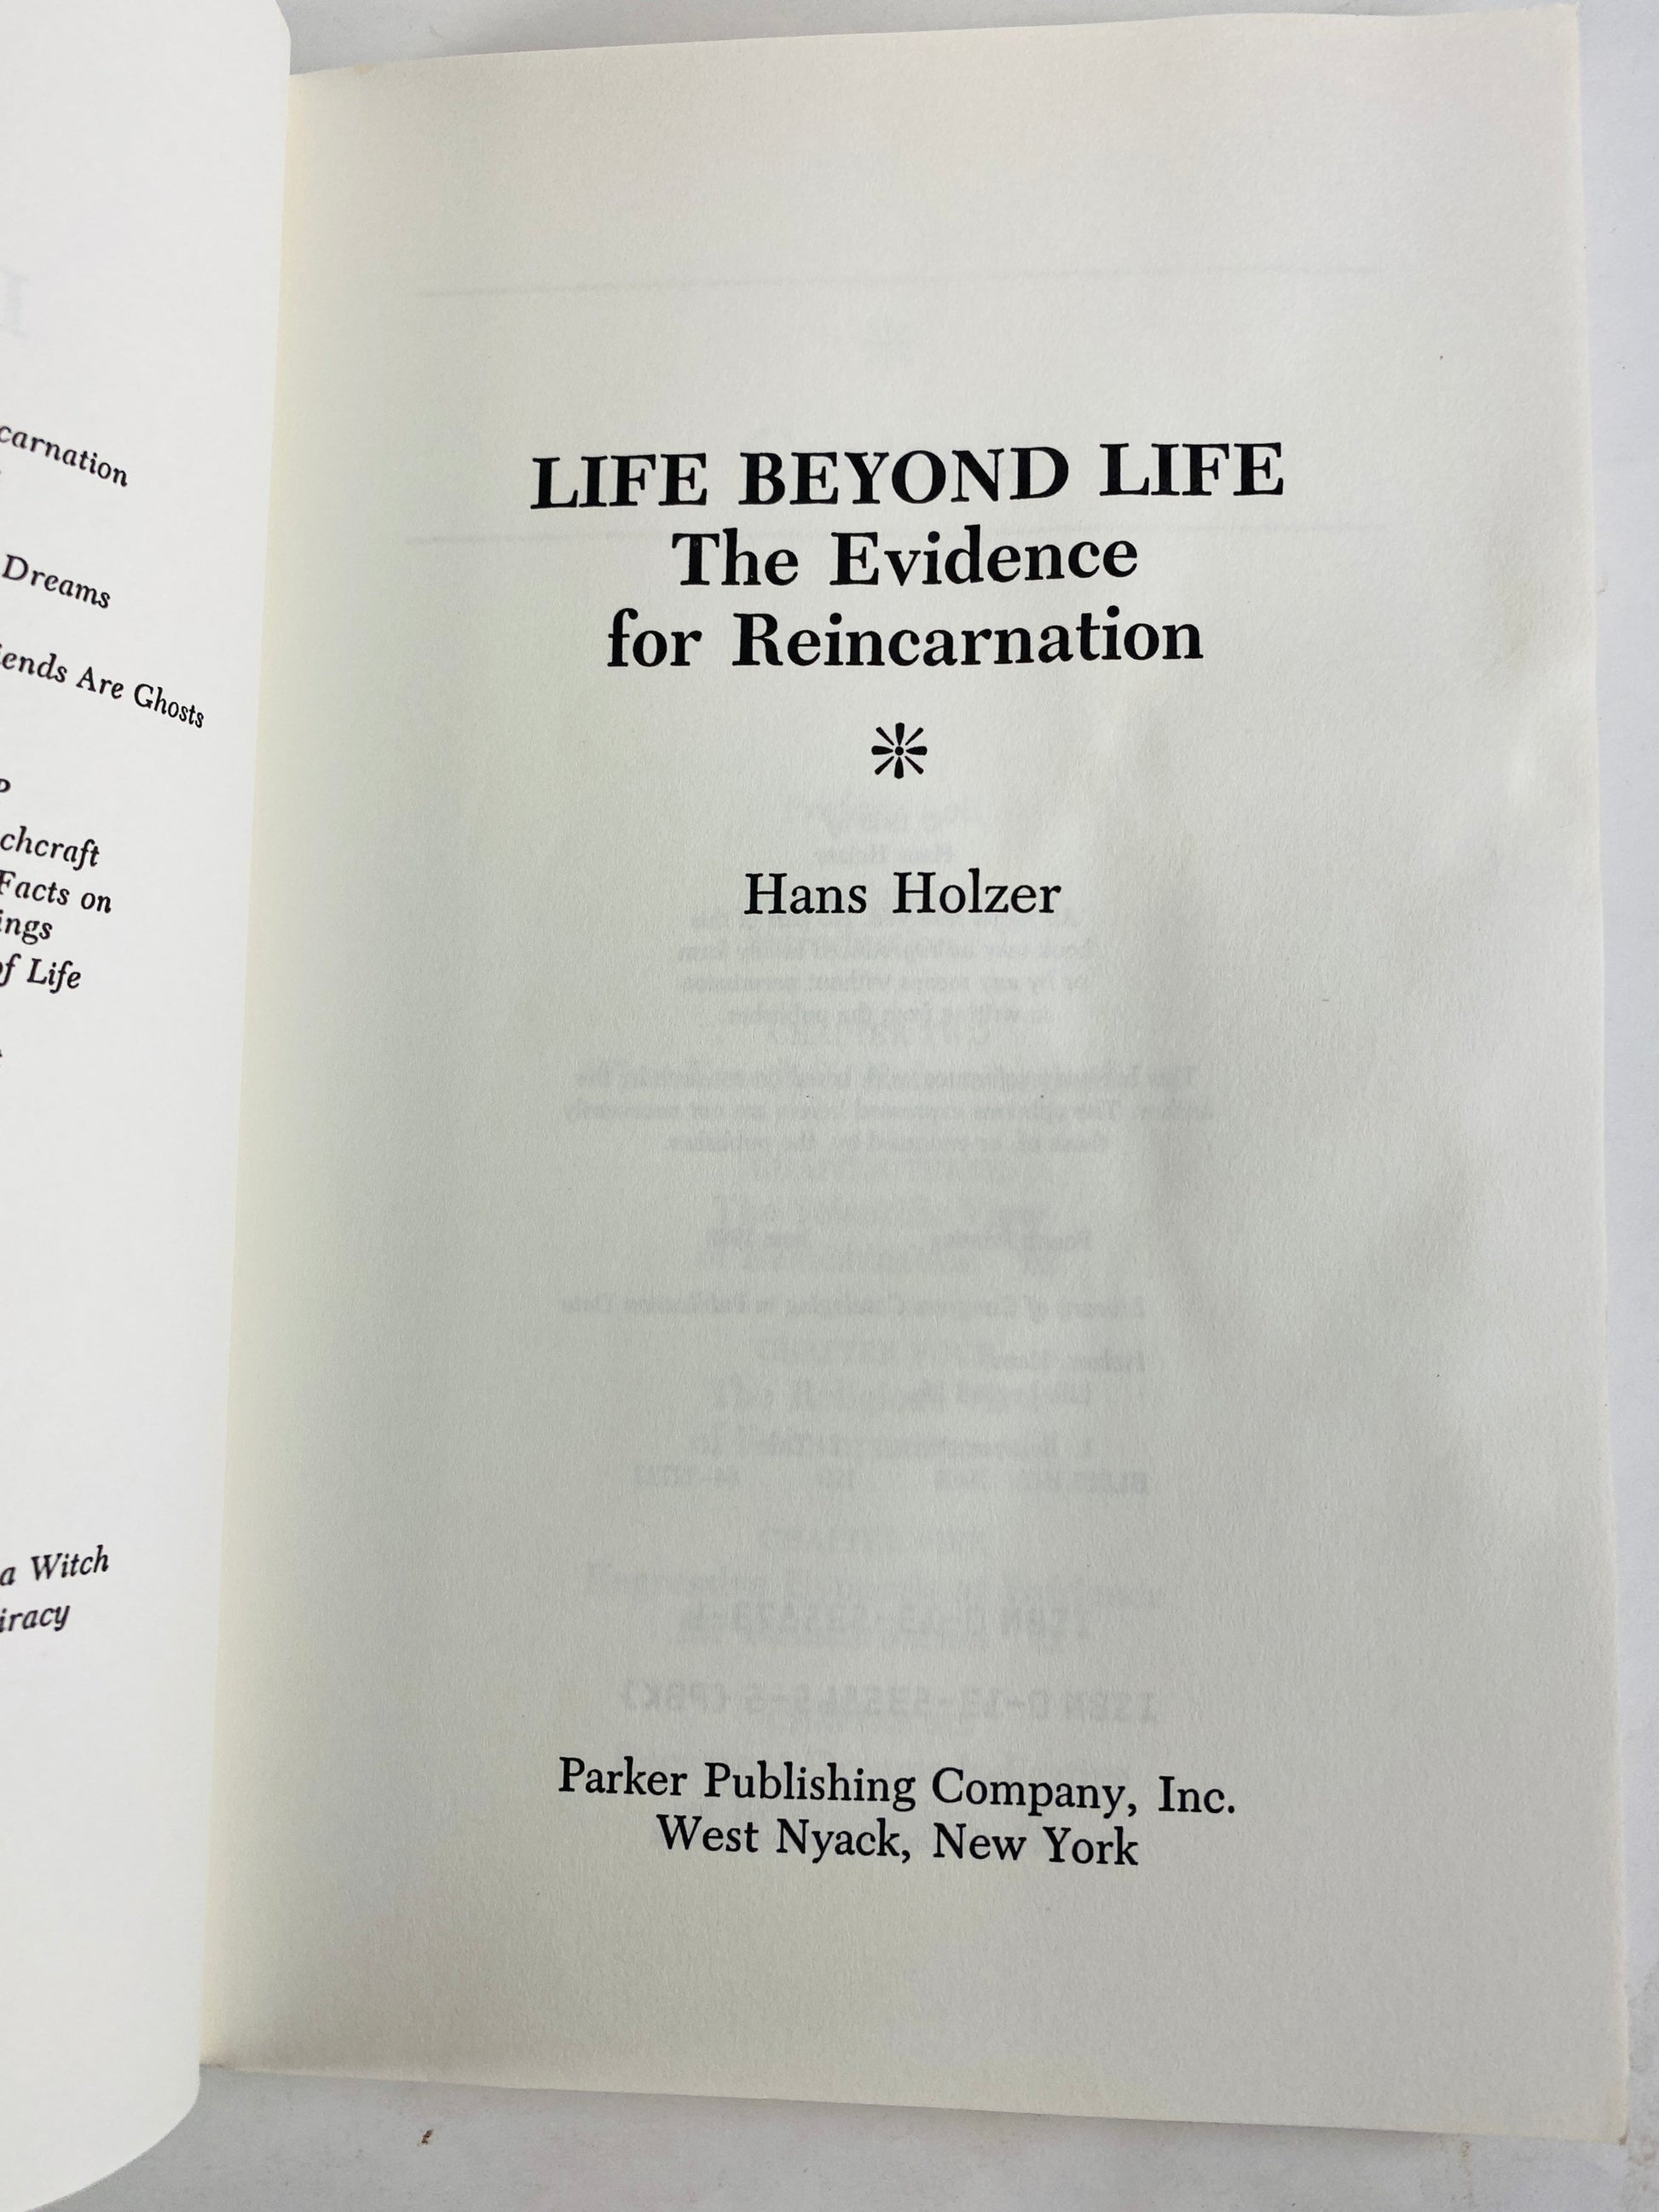 Life Beyond Life vintage paperback book by Hans Holzer circa 1986 witches destiny Occult speak communication with deceased spiritual